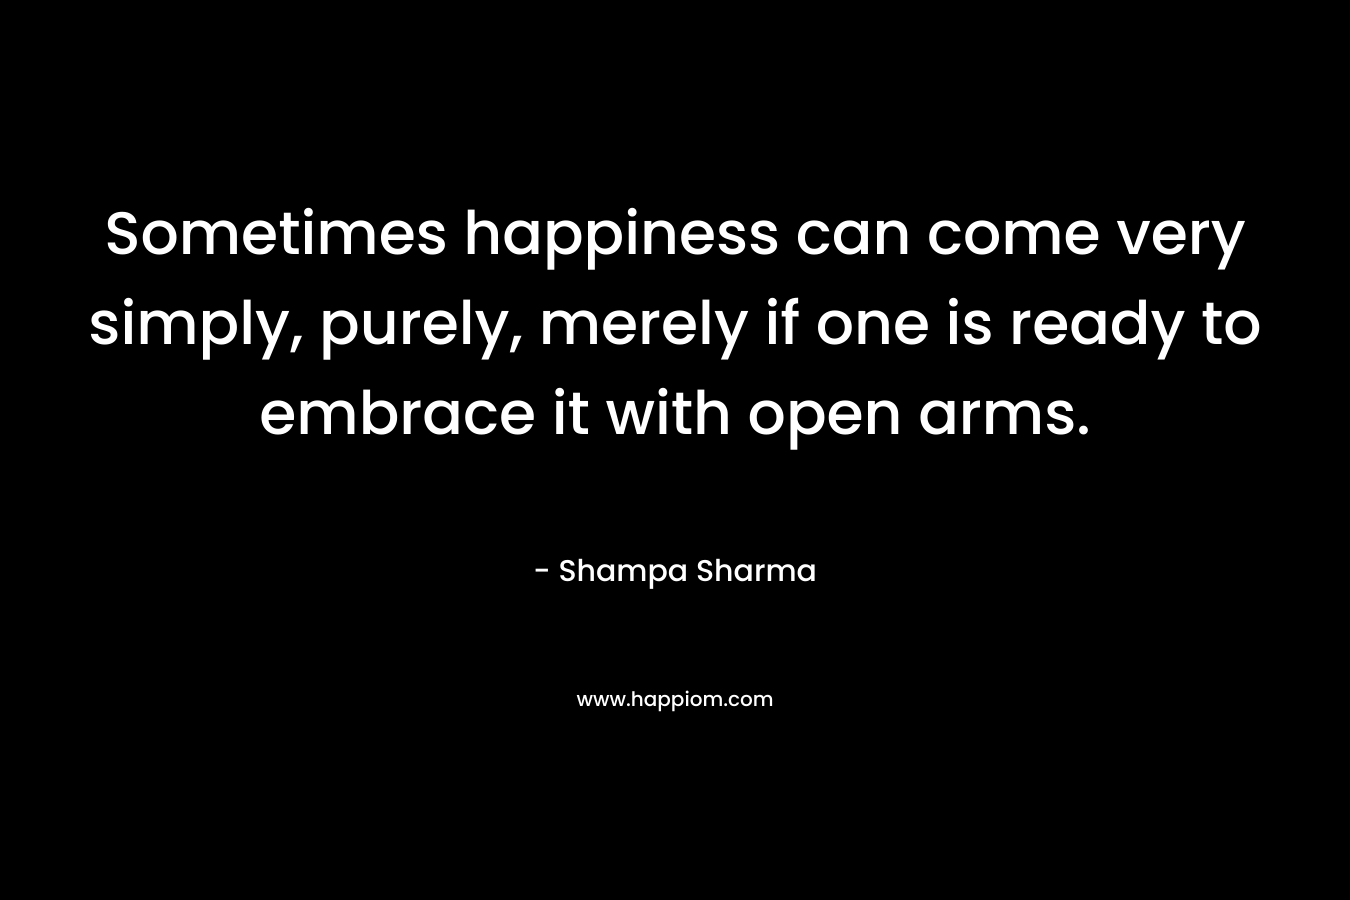 Sometimes happiness can come very simply, purely, merely if one is ready to embrace it with open arms. – Shampa Sharma